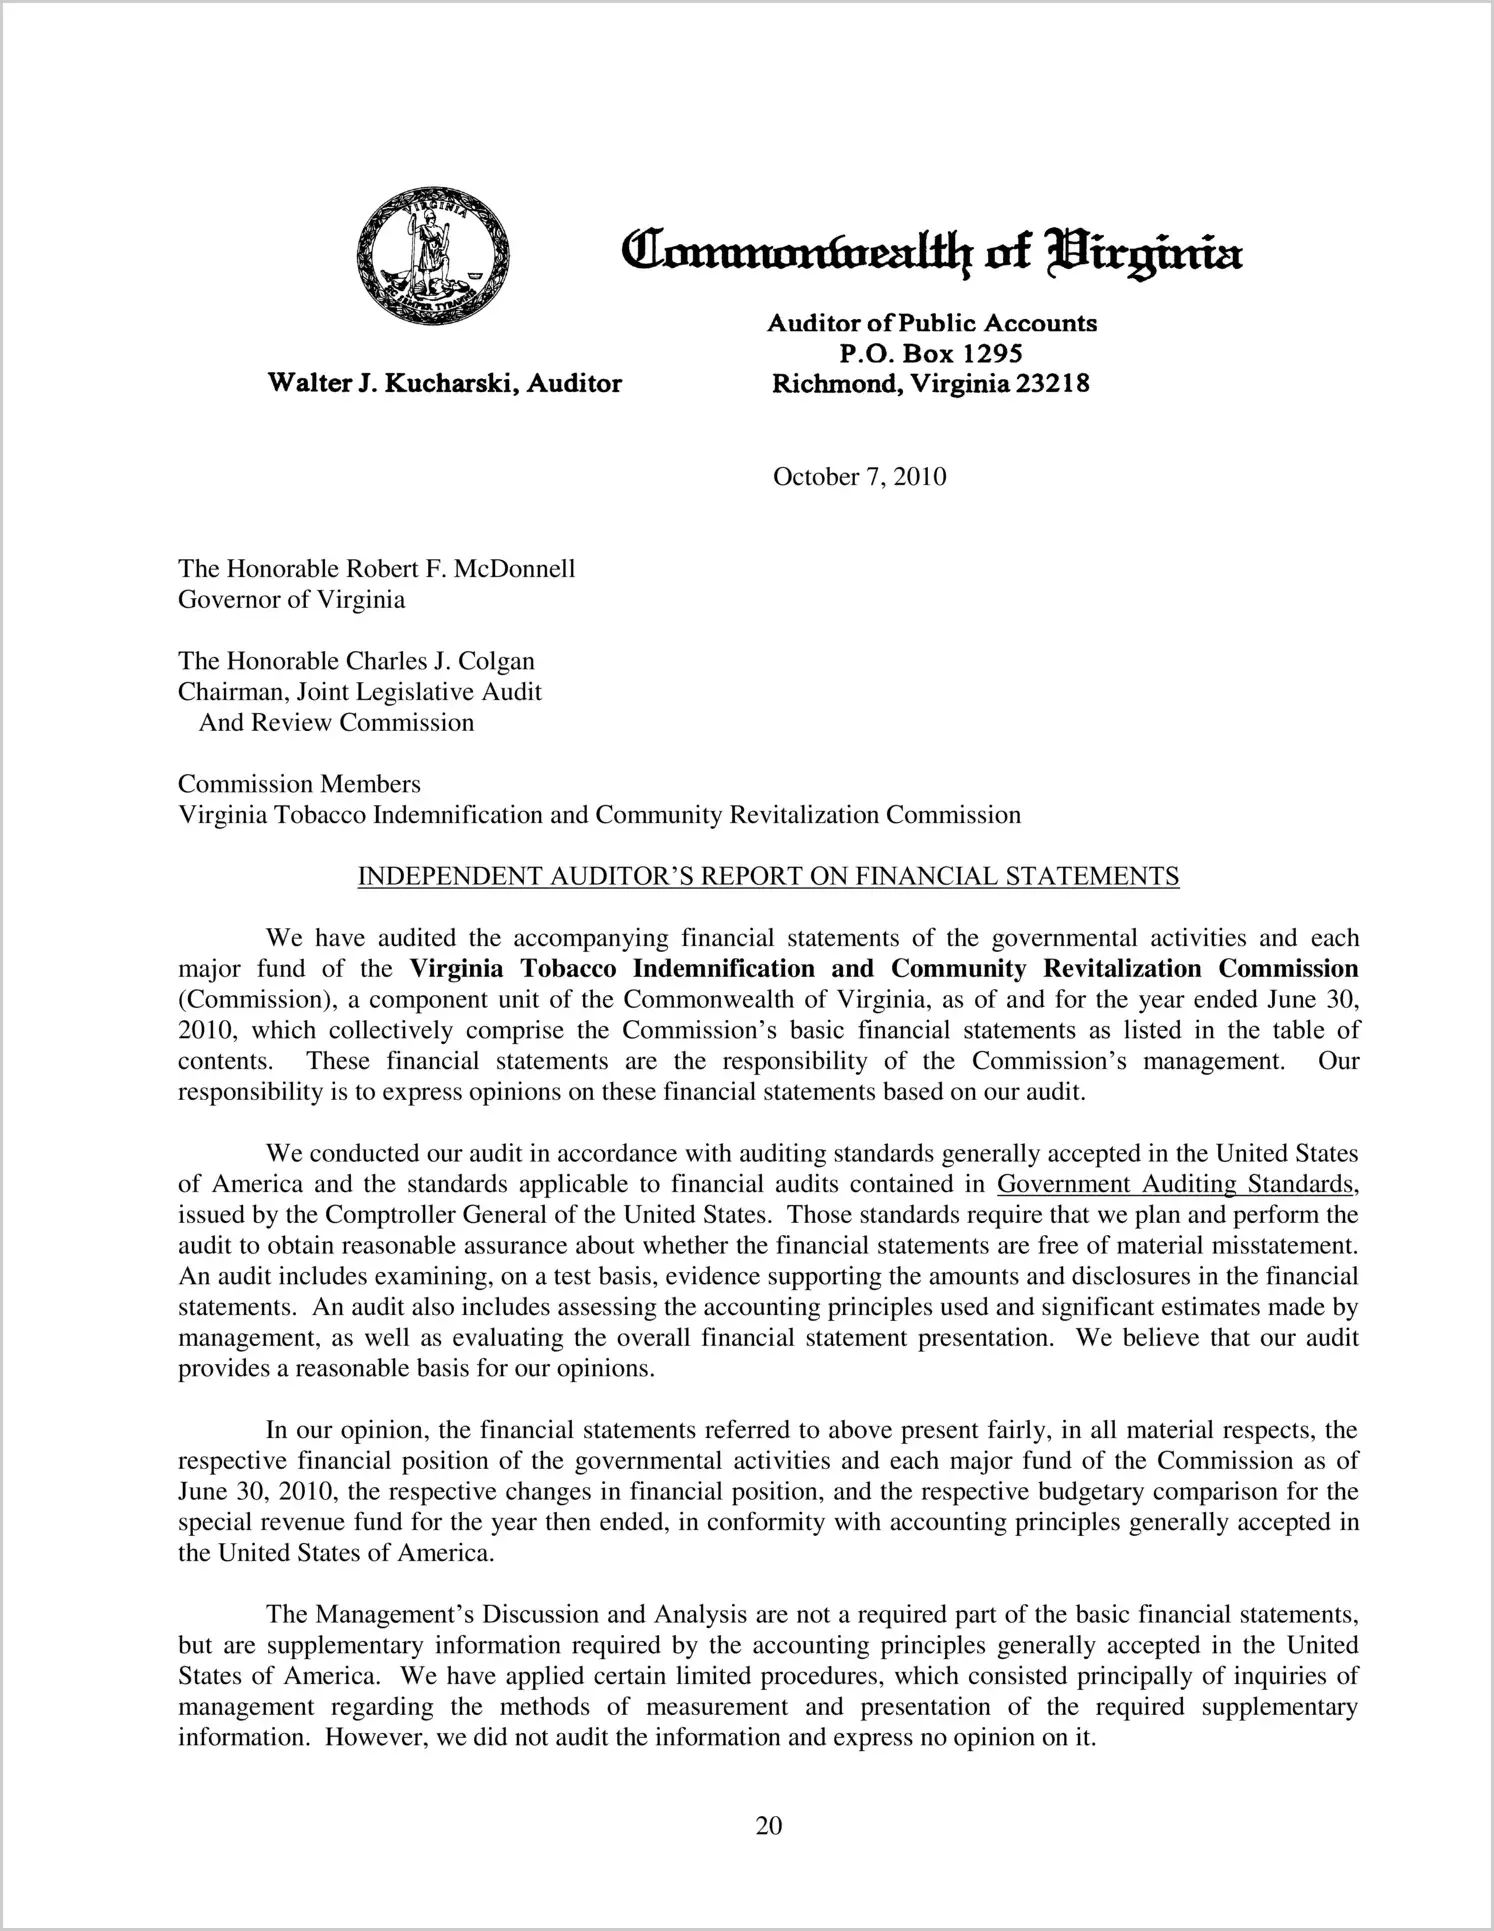 Virginia Tobacco Indemnification and Community Revitalization Financial Statements or the year ended June 30, 2010